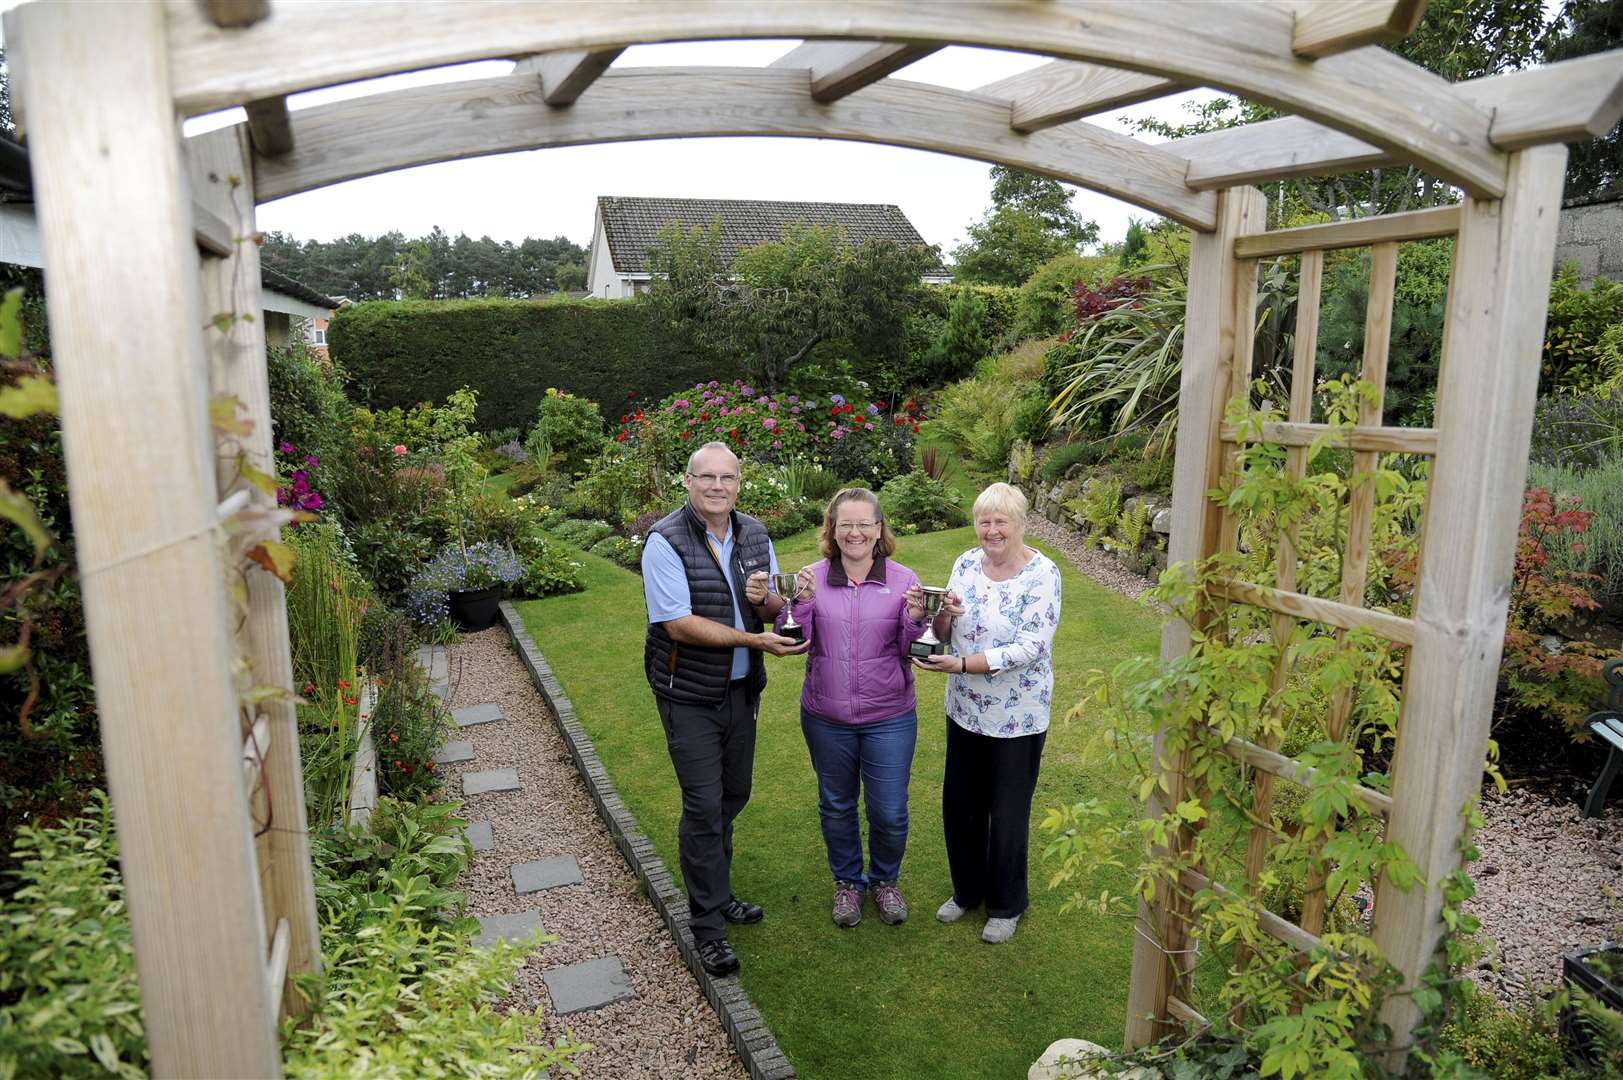 Lhanbryde & District Gardening Club's secretary Gail Mands (centre) presents trophies to the winner of the best kept large garden Graeme Hastie (left) and the winner of the best kept small garden Sheila Gowans. Picture: Eric Cormack. Image No. 044674.